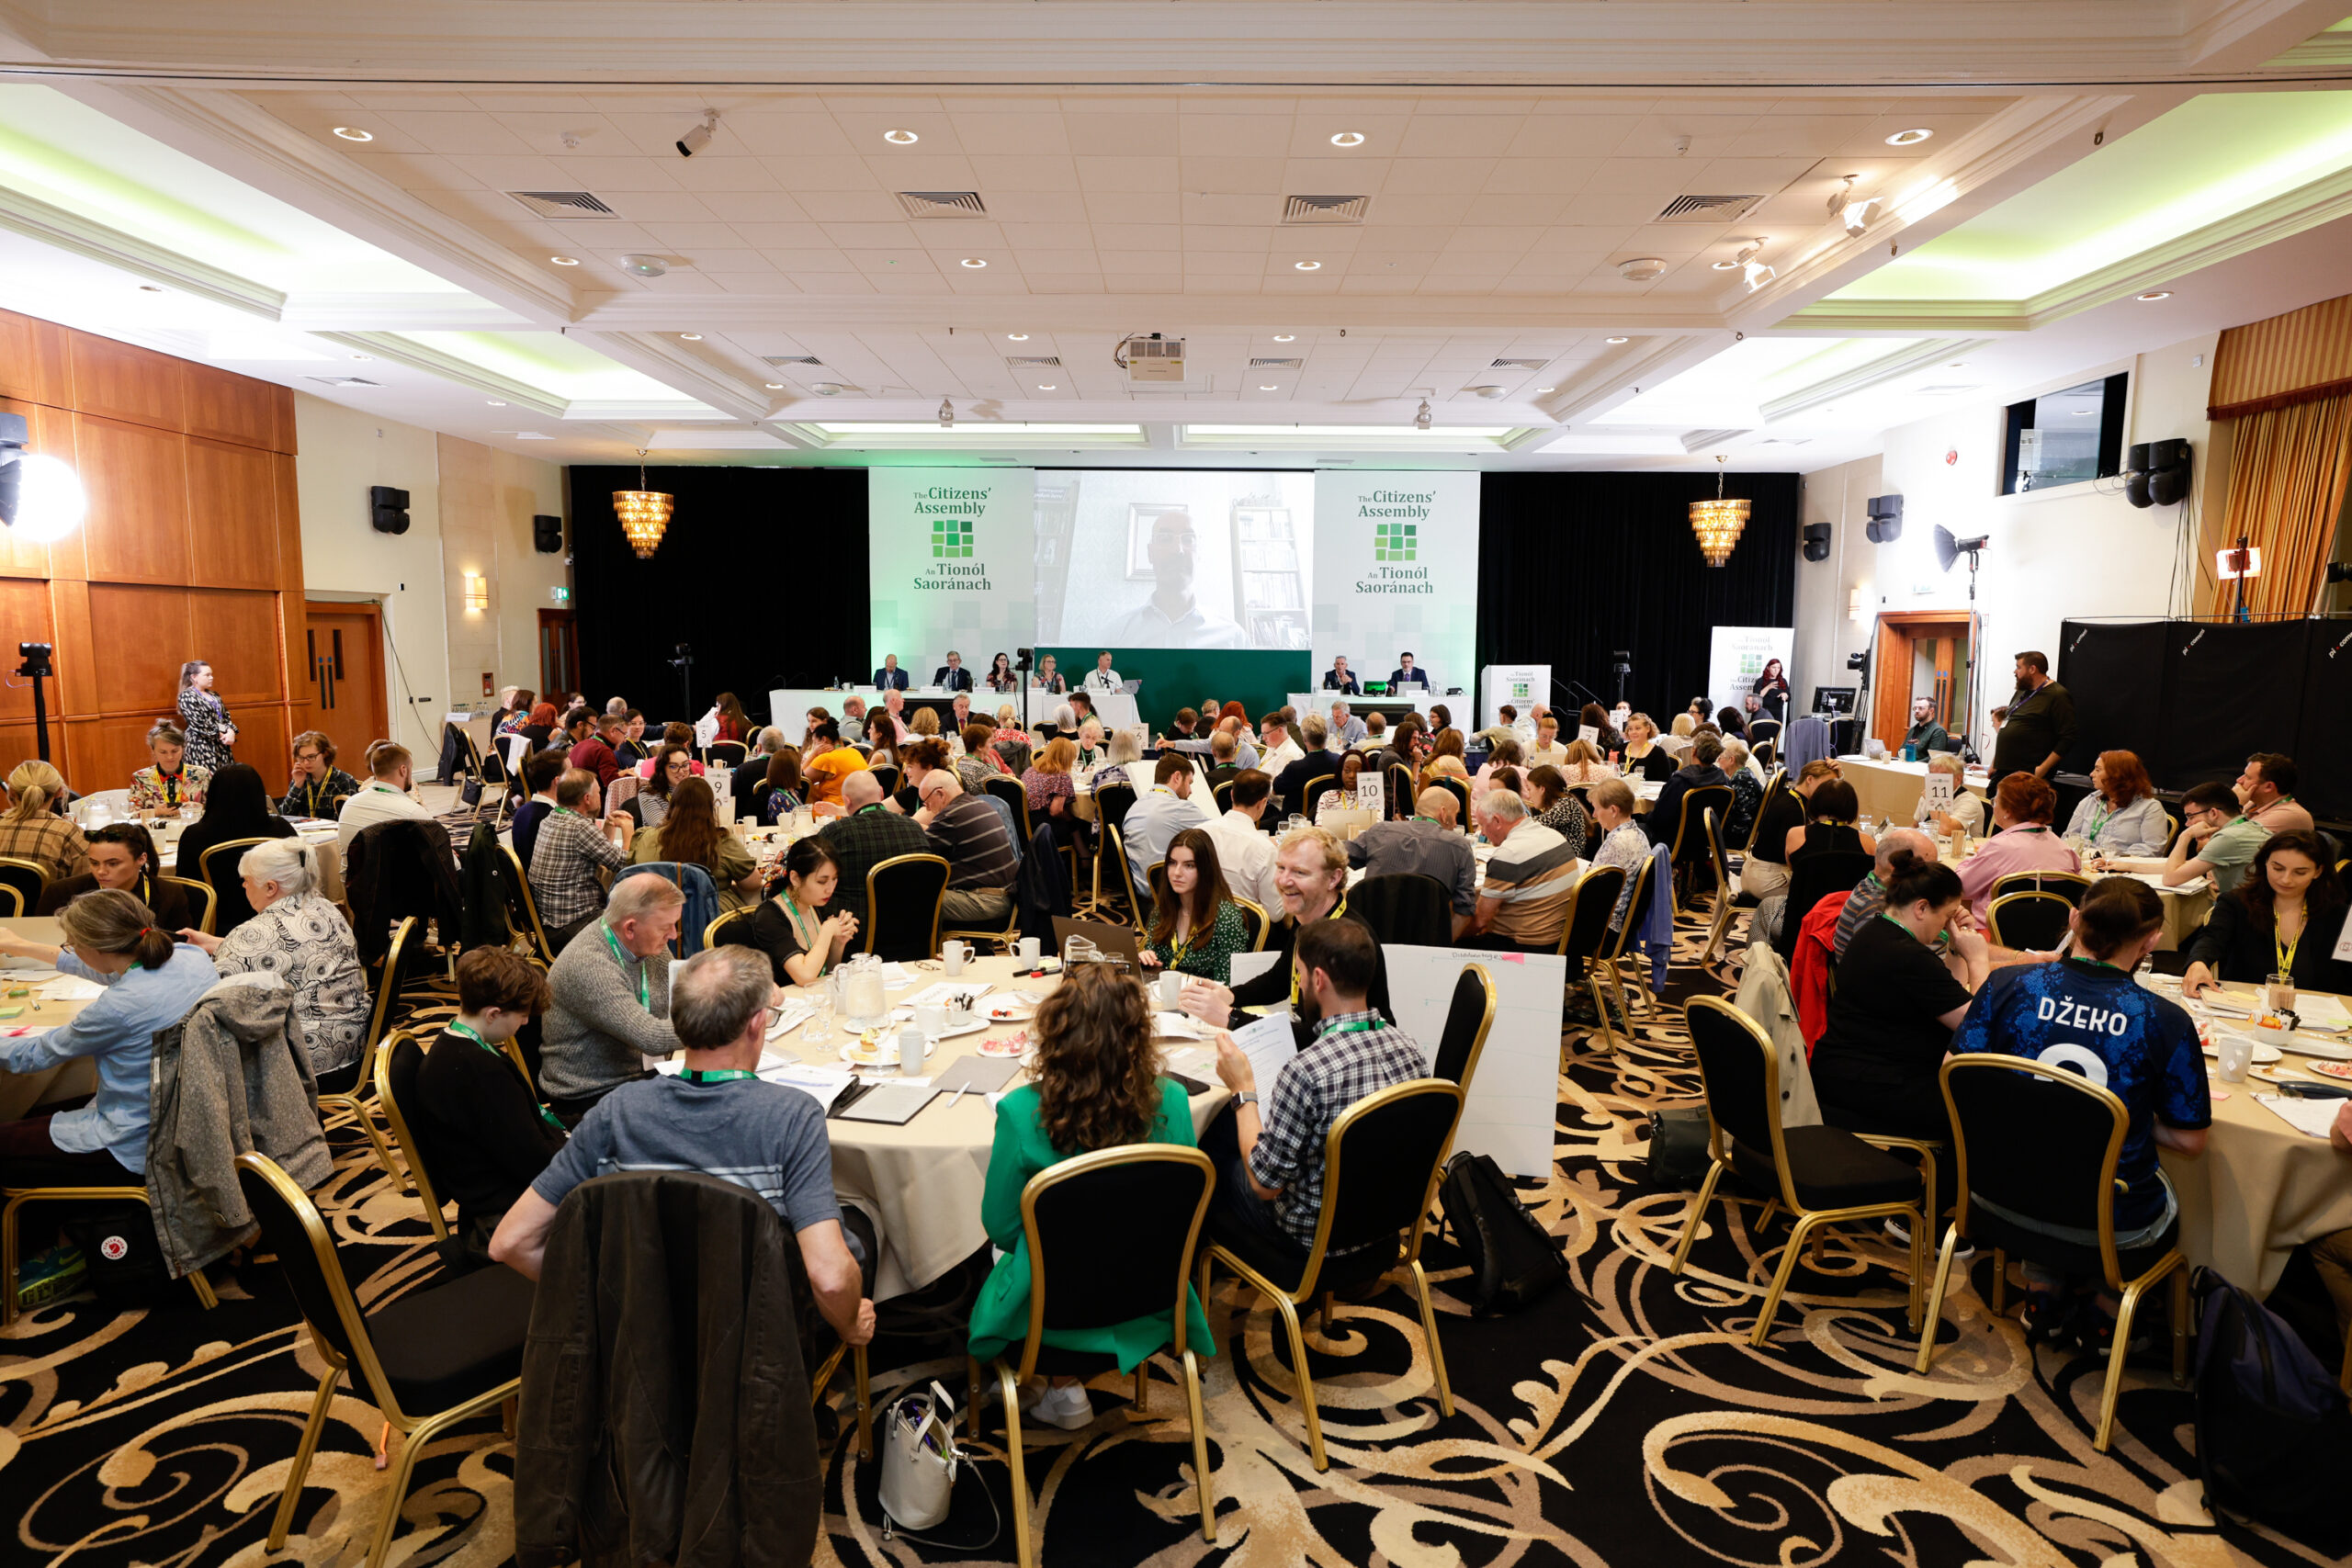 Prevention as important as cure – Citizens’ Assembly hears repeated calls for evidence based approaches to prevention